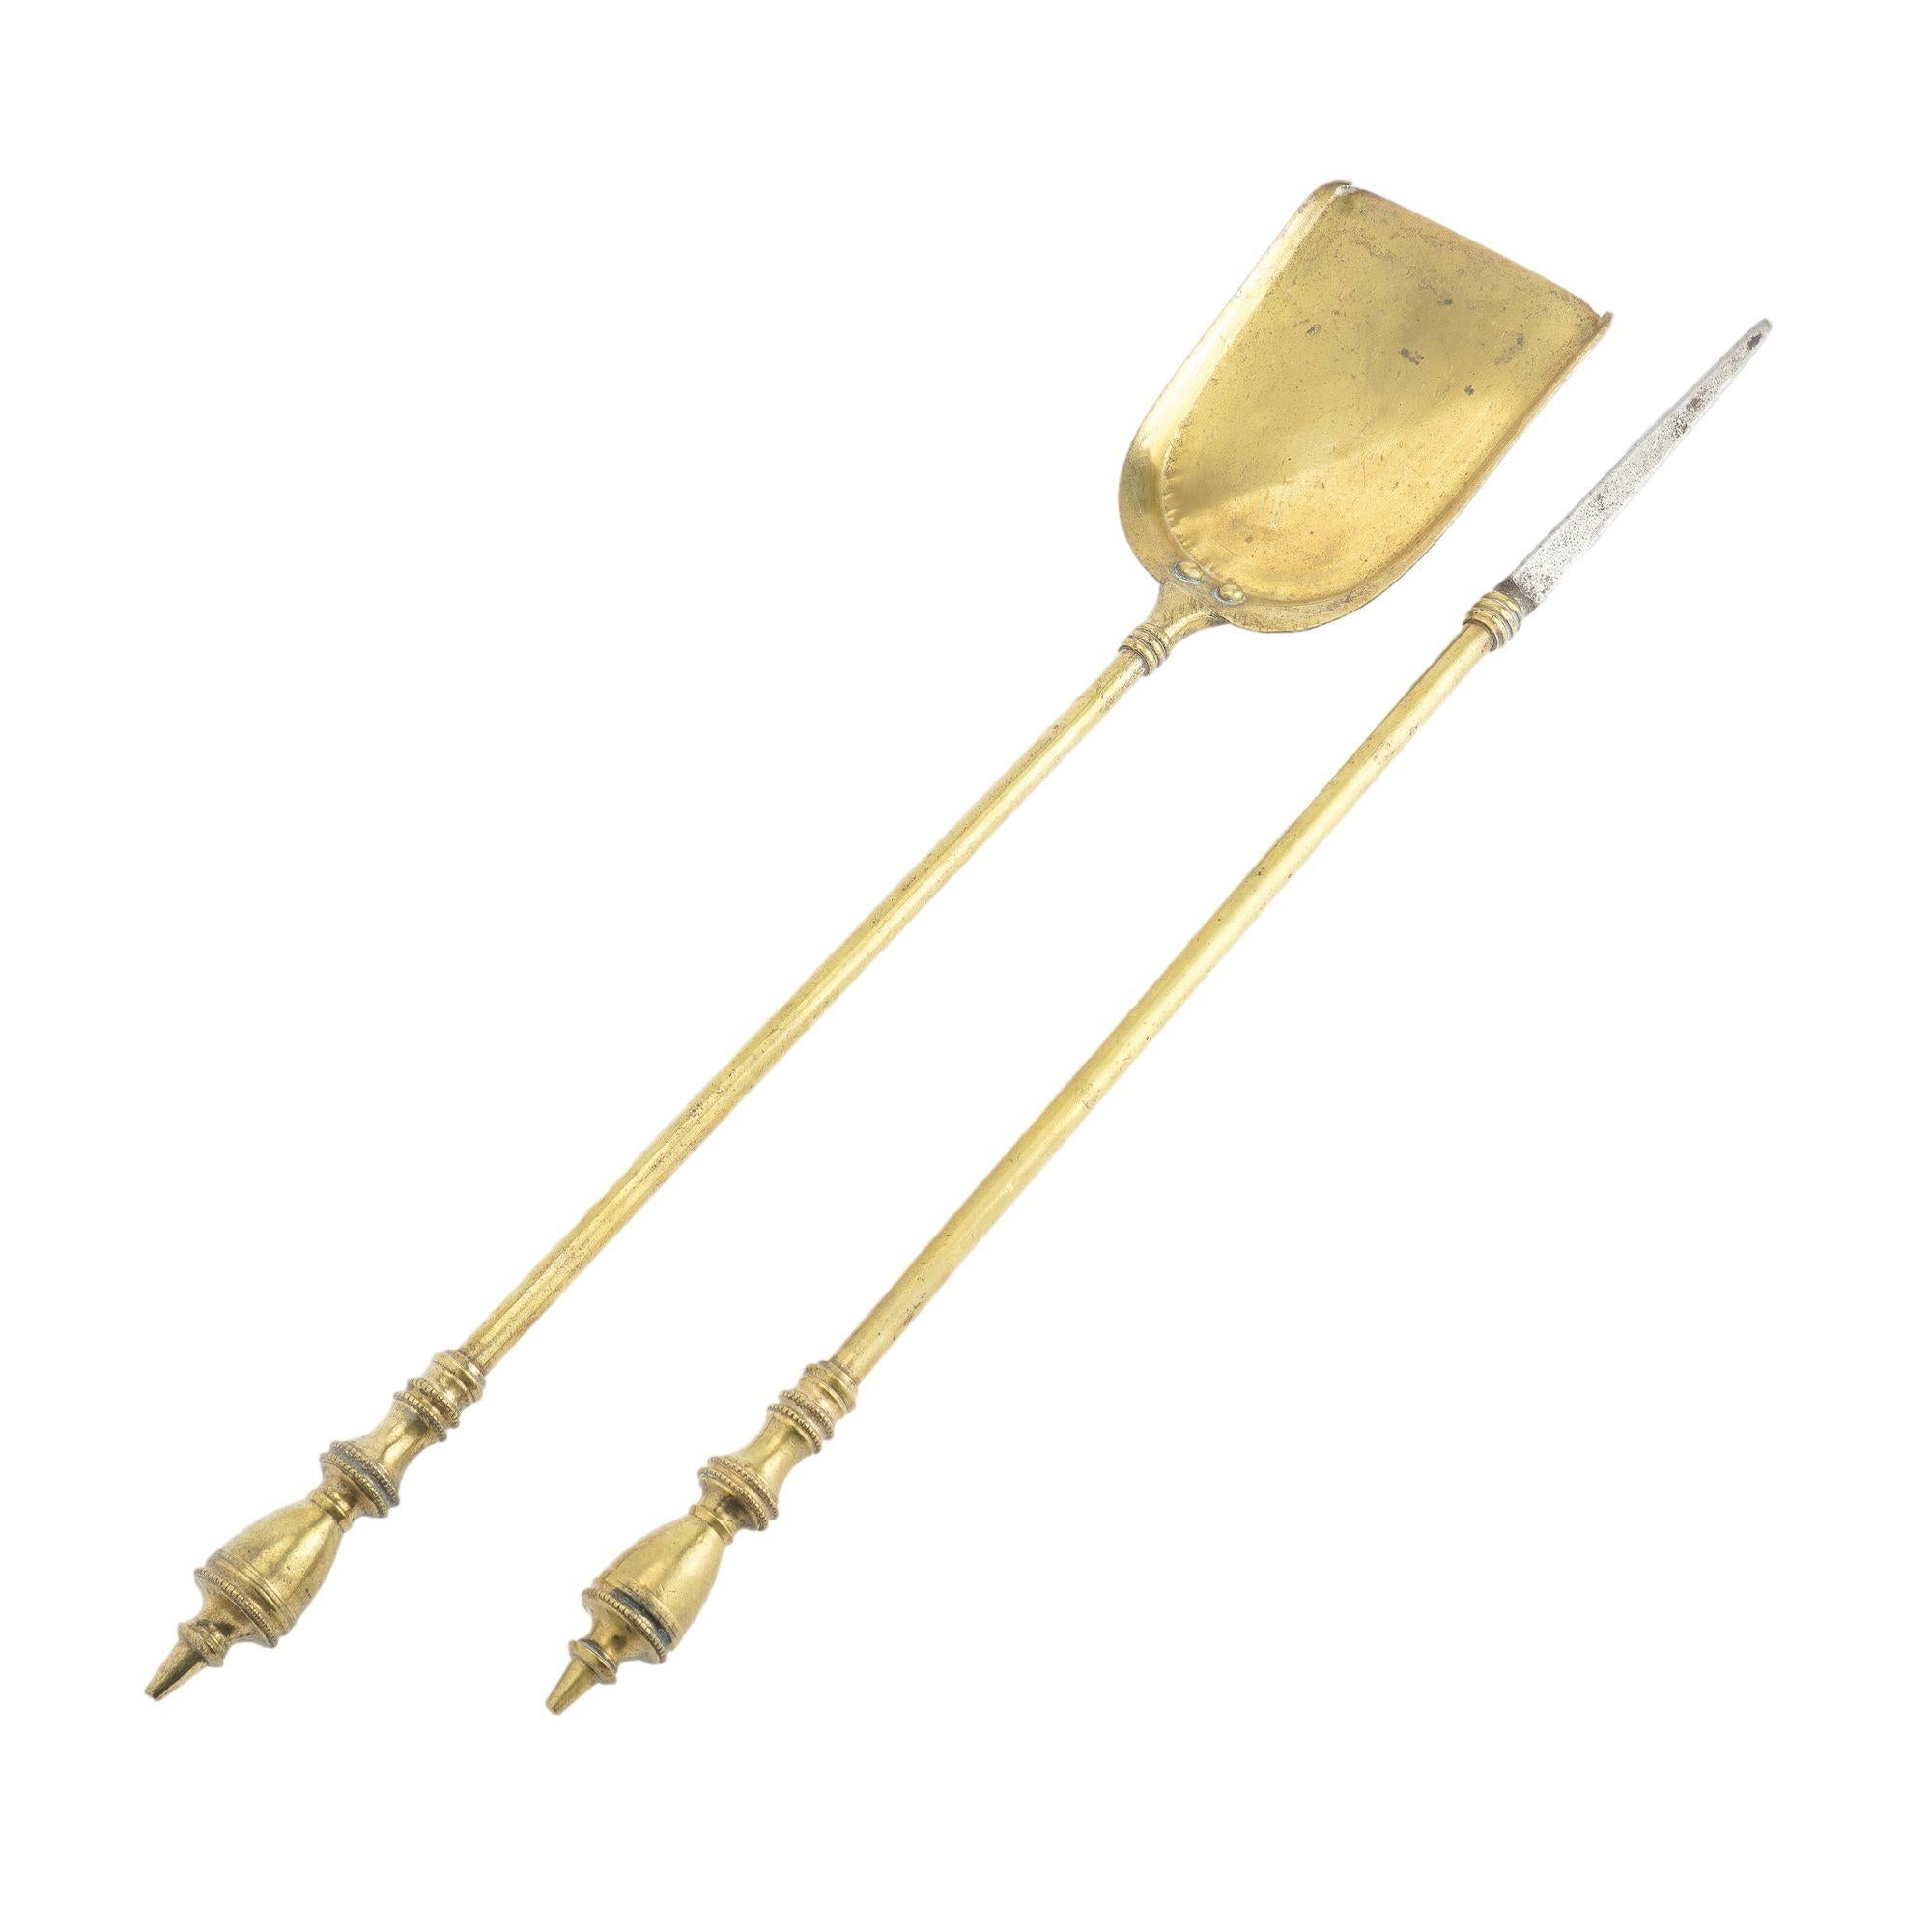 Pair of Academic Revival brass fire tools consisting of a shovel and poker with urn finial. The poker has an iron tip.
American, circa 1950.